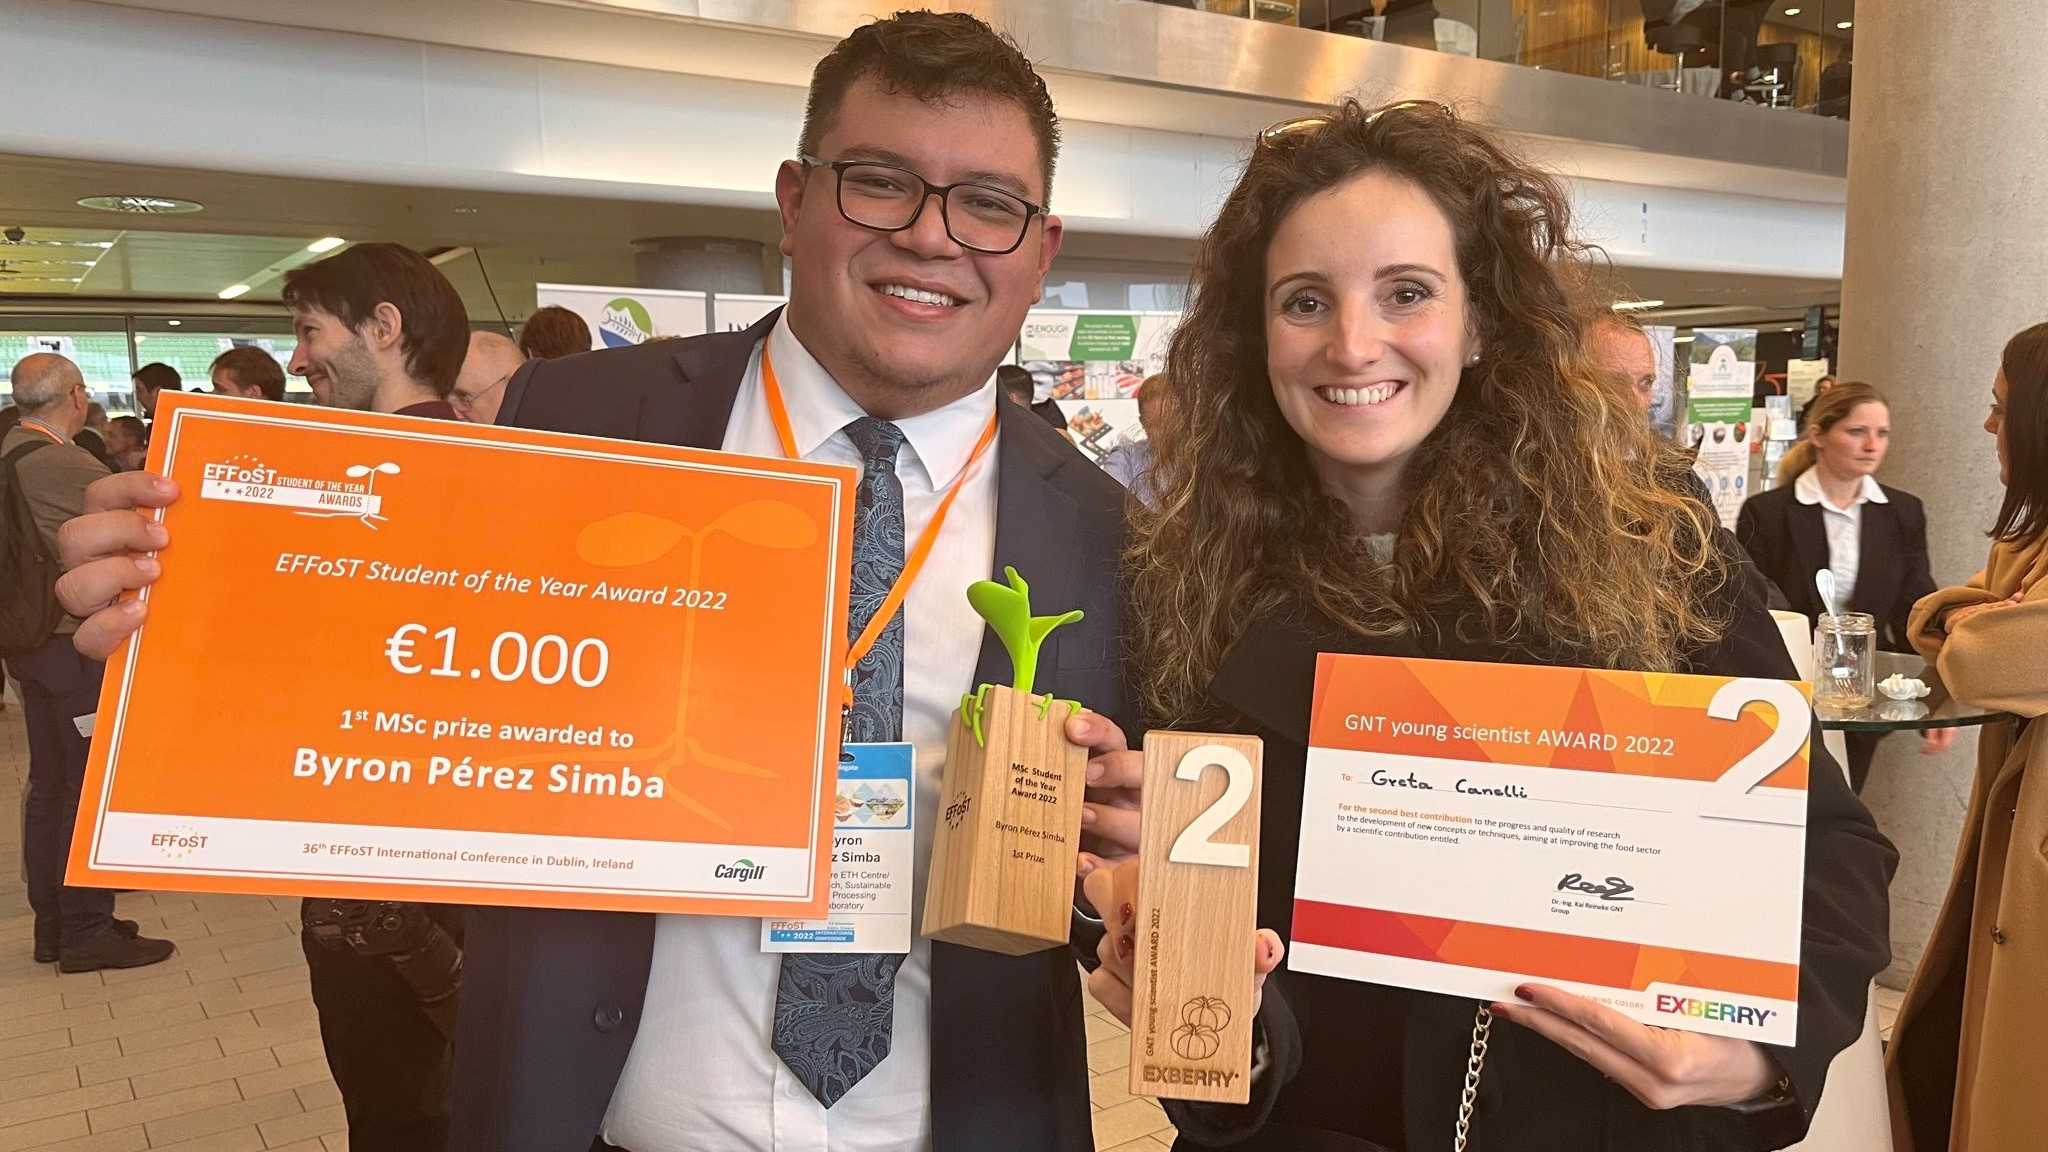 Byron Perez (left) receives his 'Master Student of the Year Award' by The European Federation of Food Science and Technology (EFFoST) on 9 Nov in Ireland